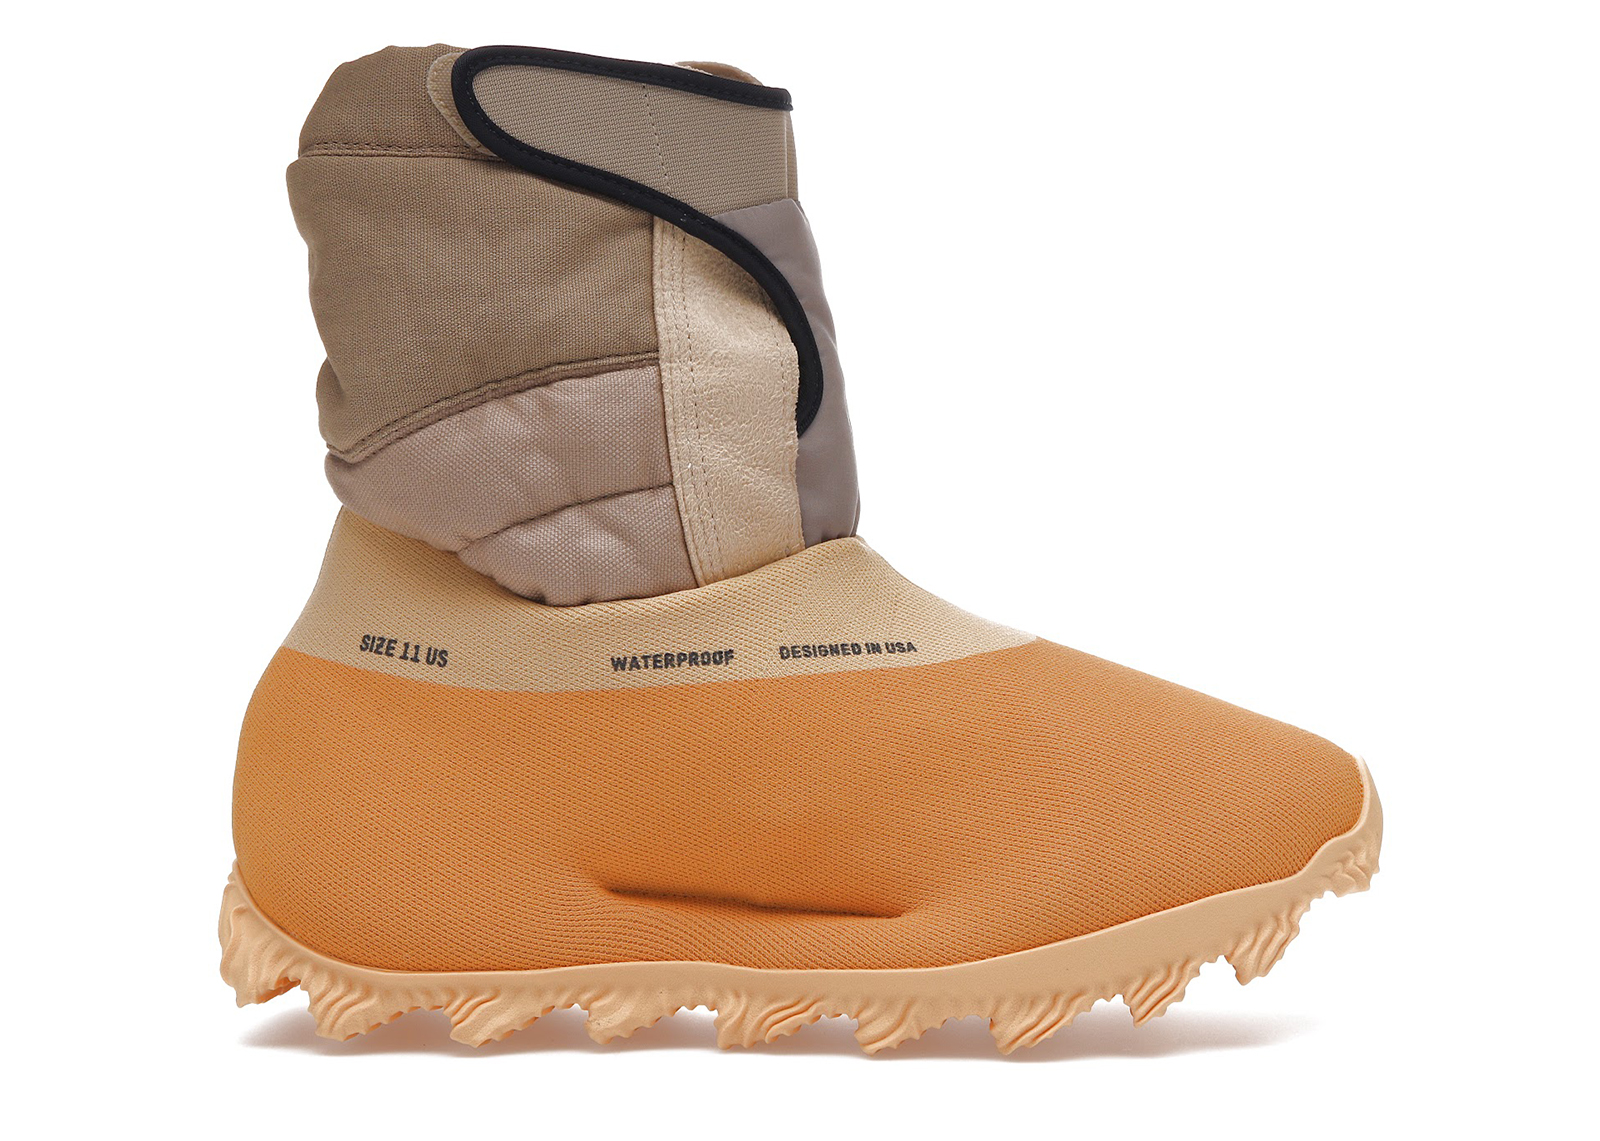 adidas Yeezy Knit RNR Boot Sulfur Men's - GY1824 - US